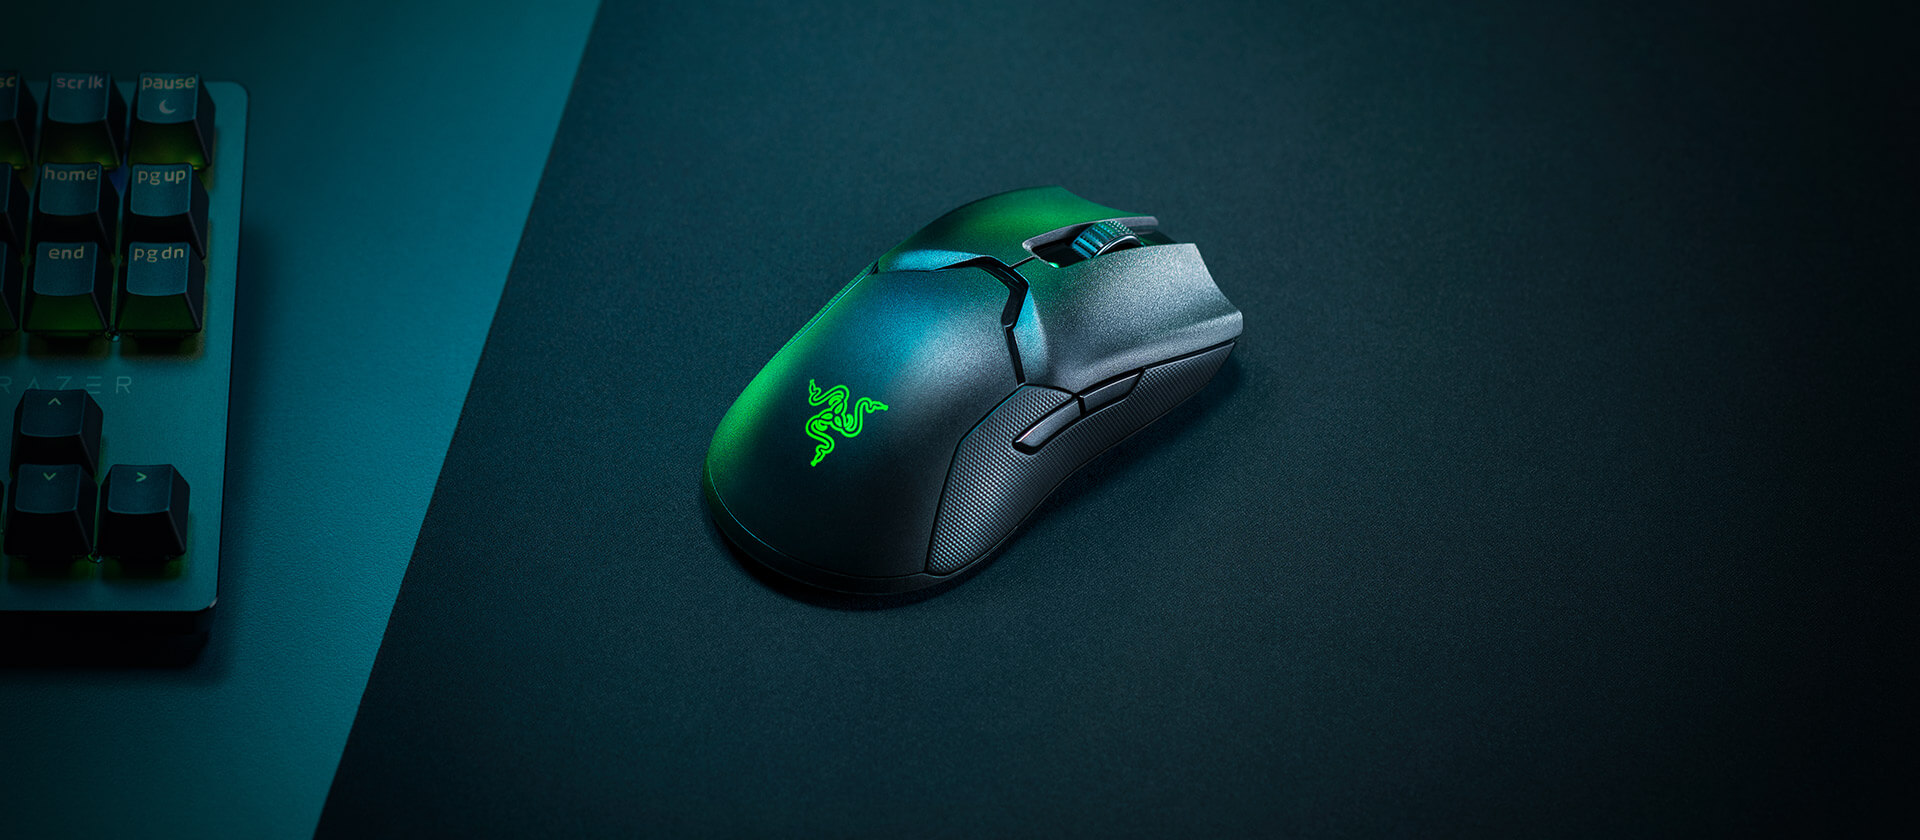 Razer launches an esports-focused Ultimate version of its Viper gaming mouse